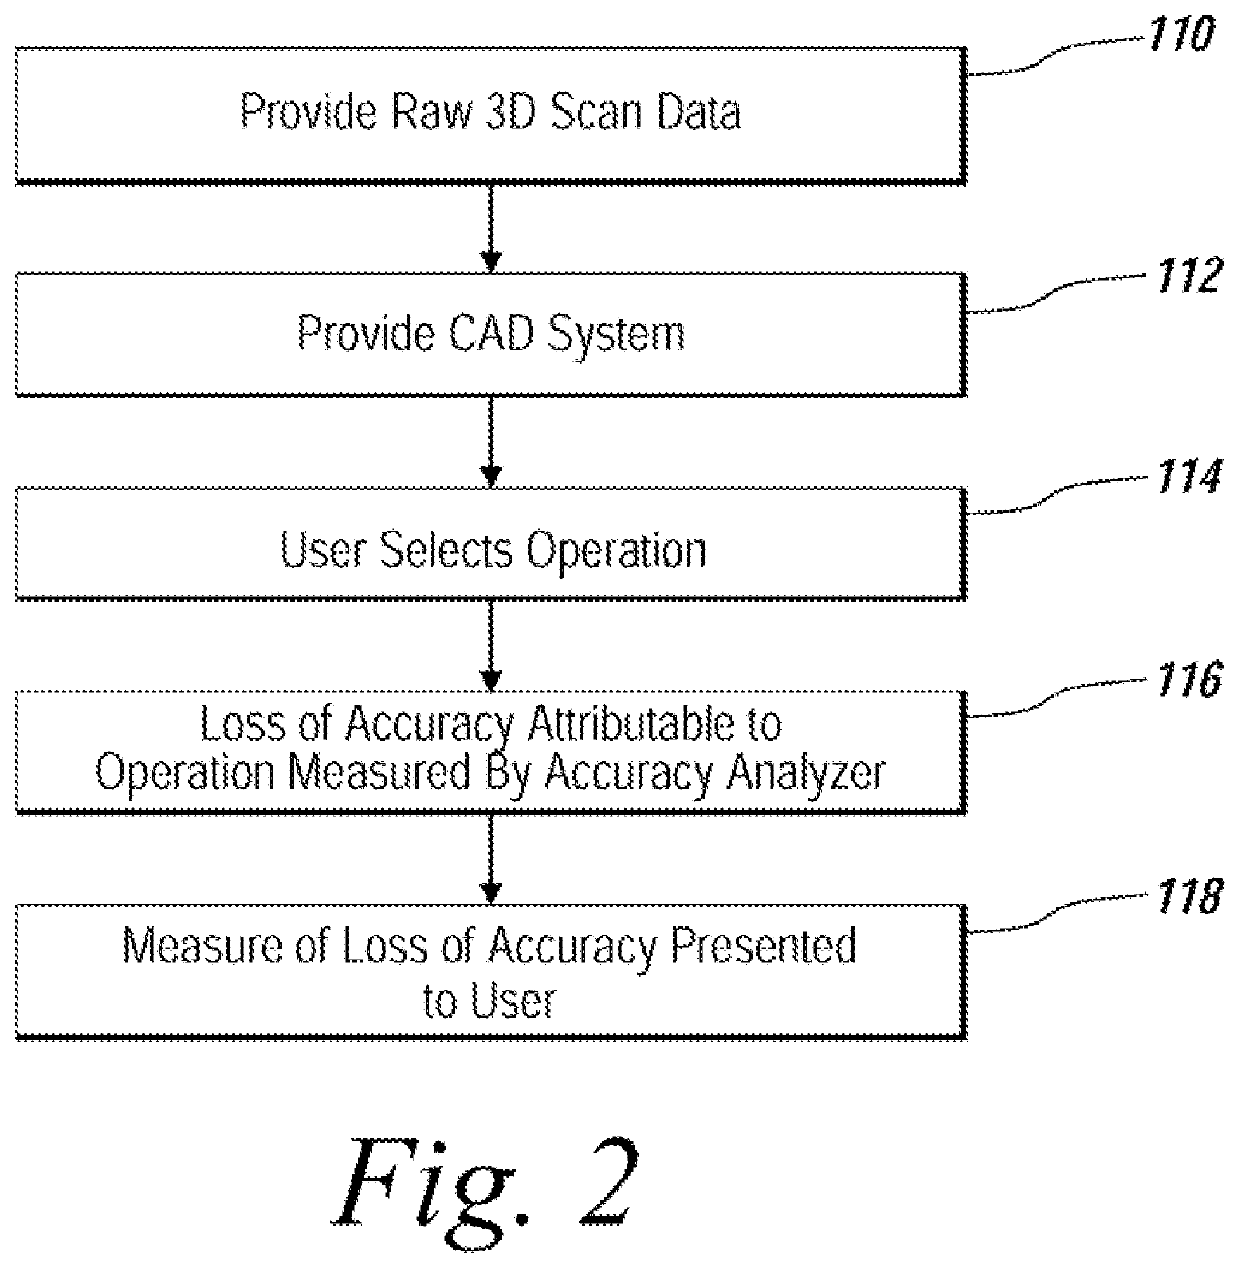 System and method for analyzing modeling accuracy while performing reverse engineering with 3D scan data